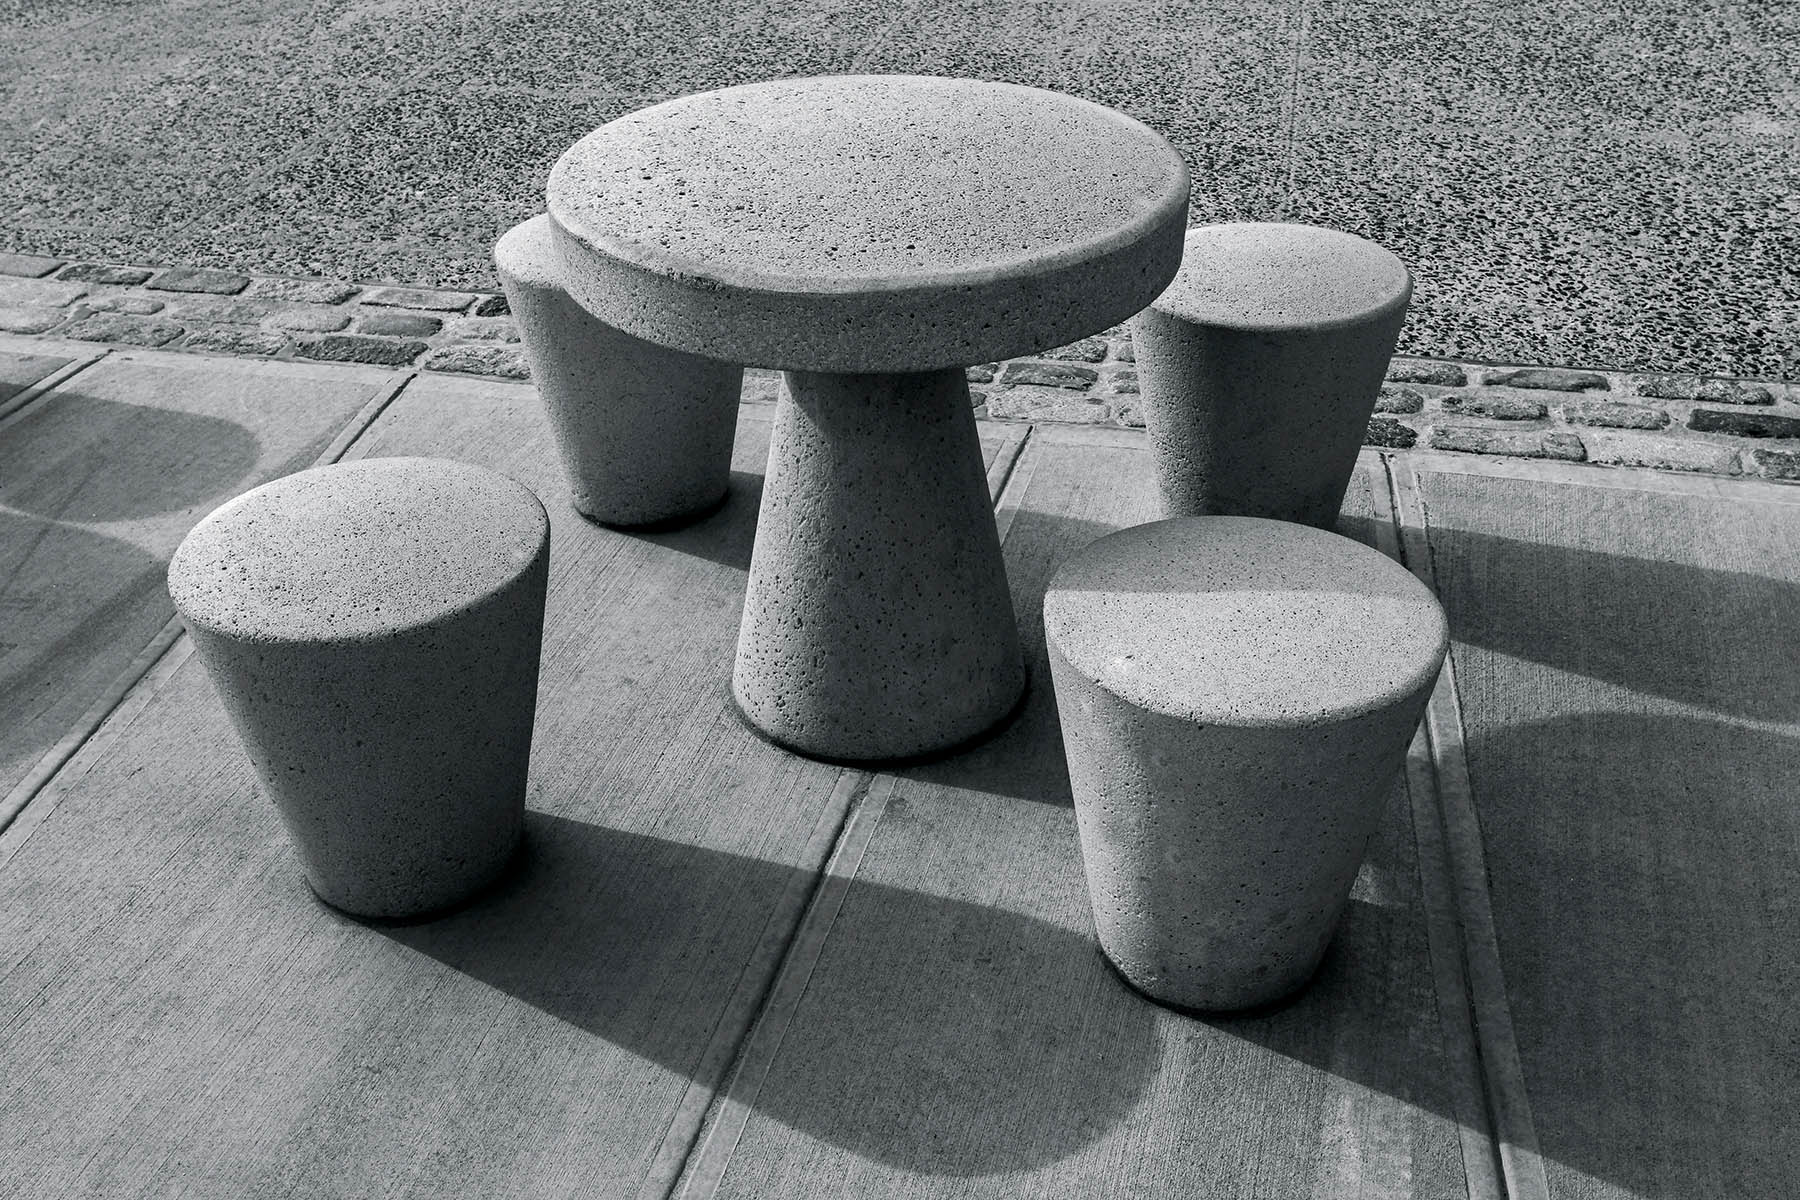 614 Concrete - Concrete Furniture: Stylish and Durable Indoor and Outdoor Designs